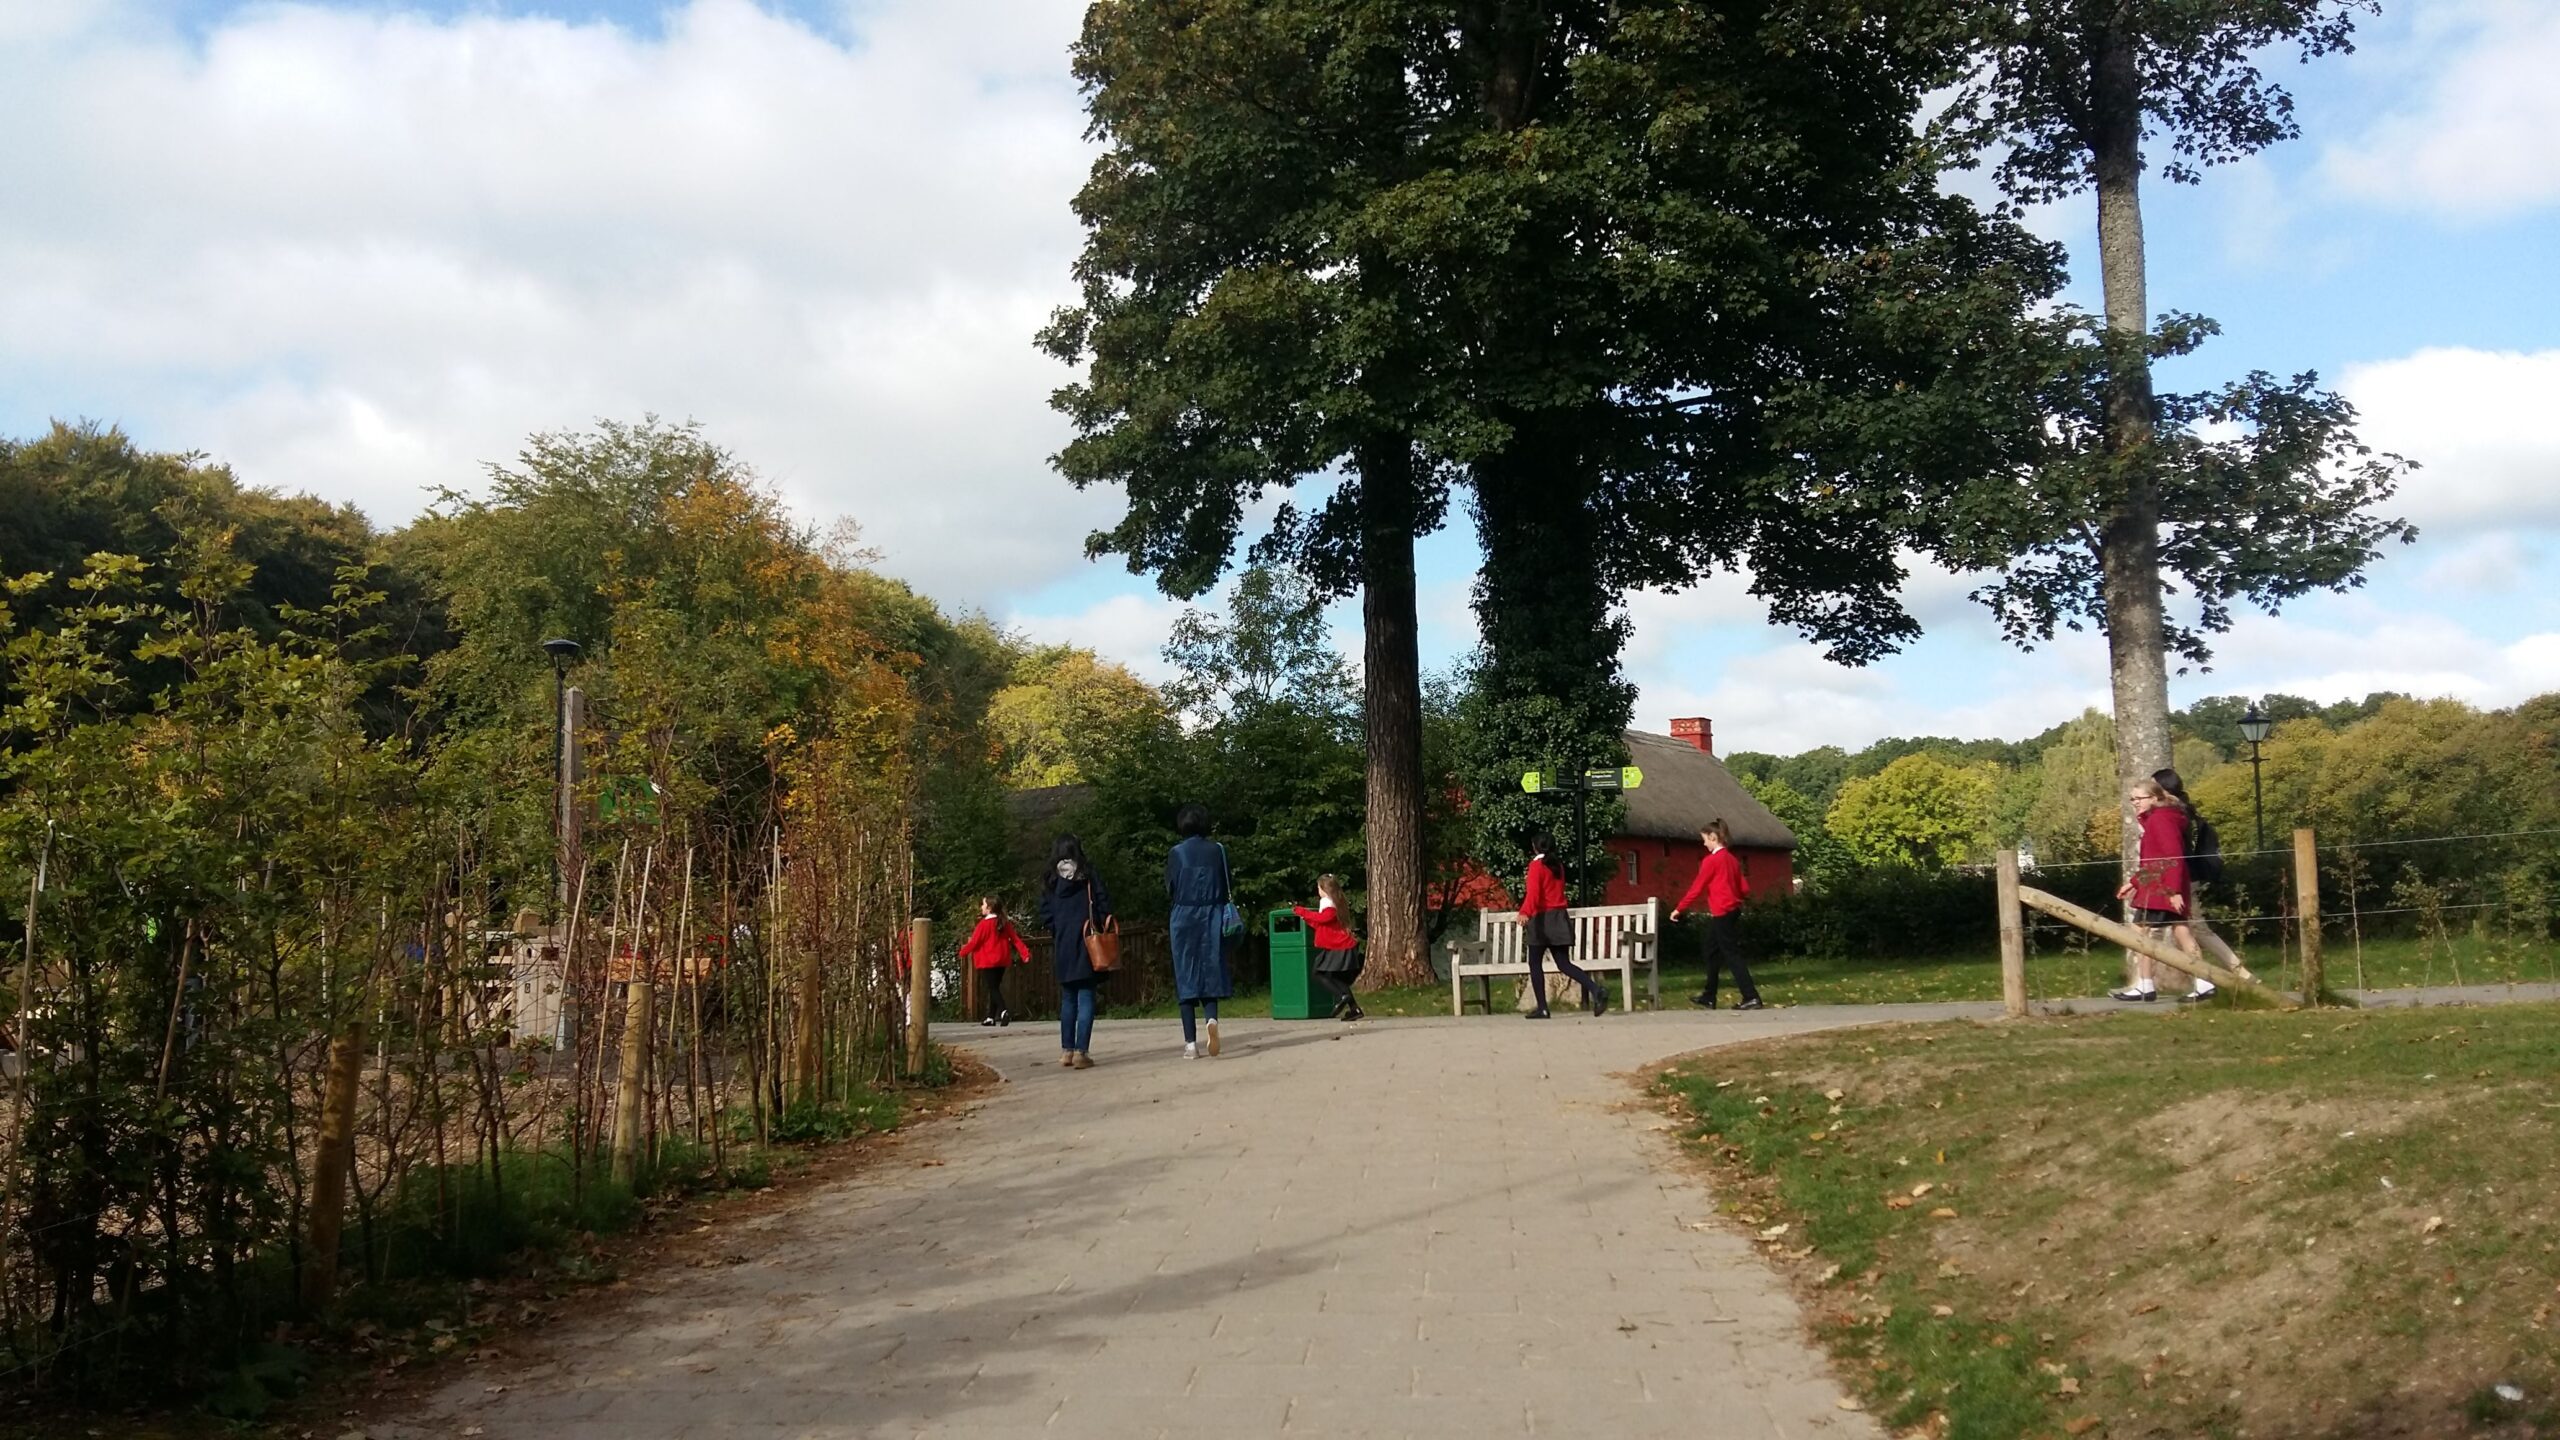 Students walking at the outdoor trails of the St Fagans National Museum